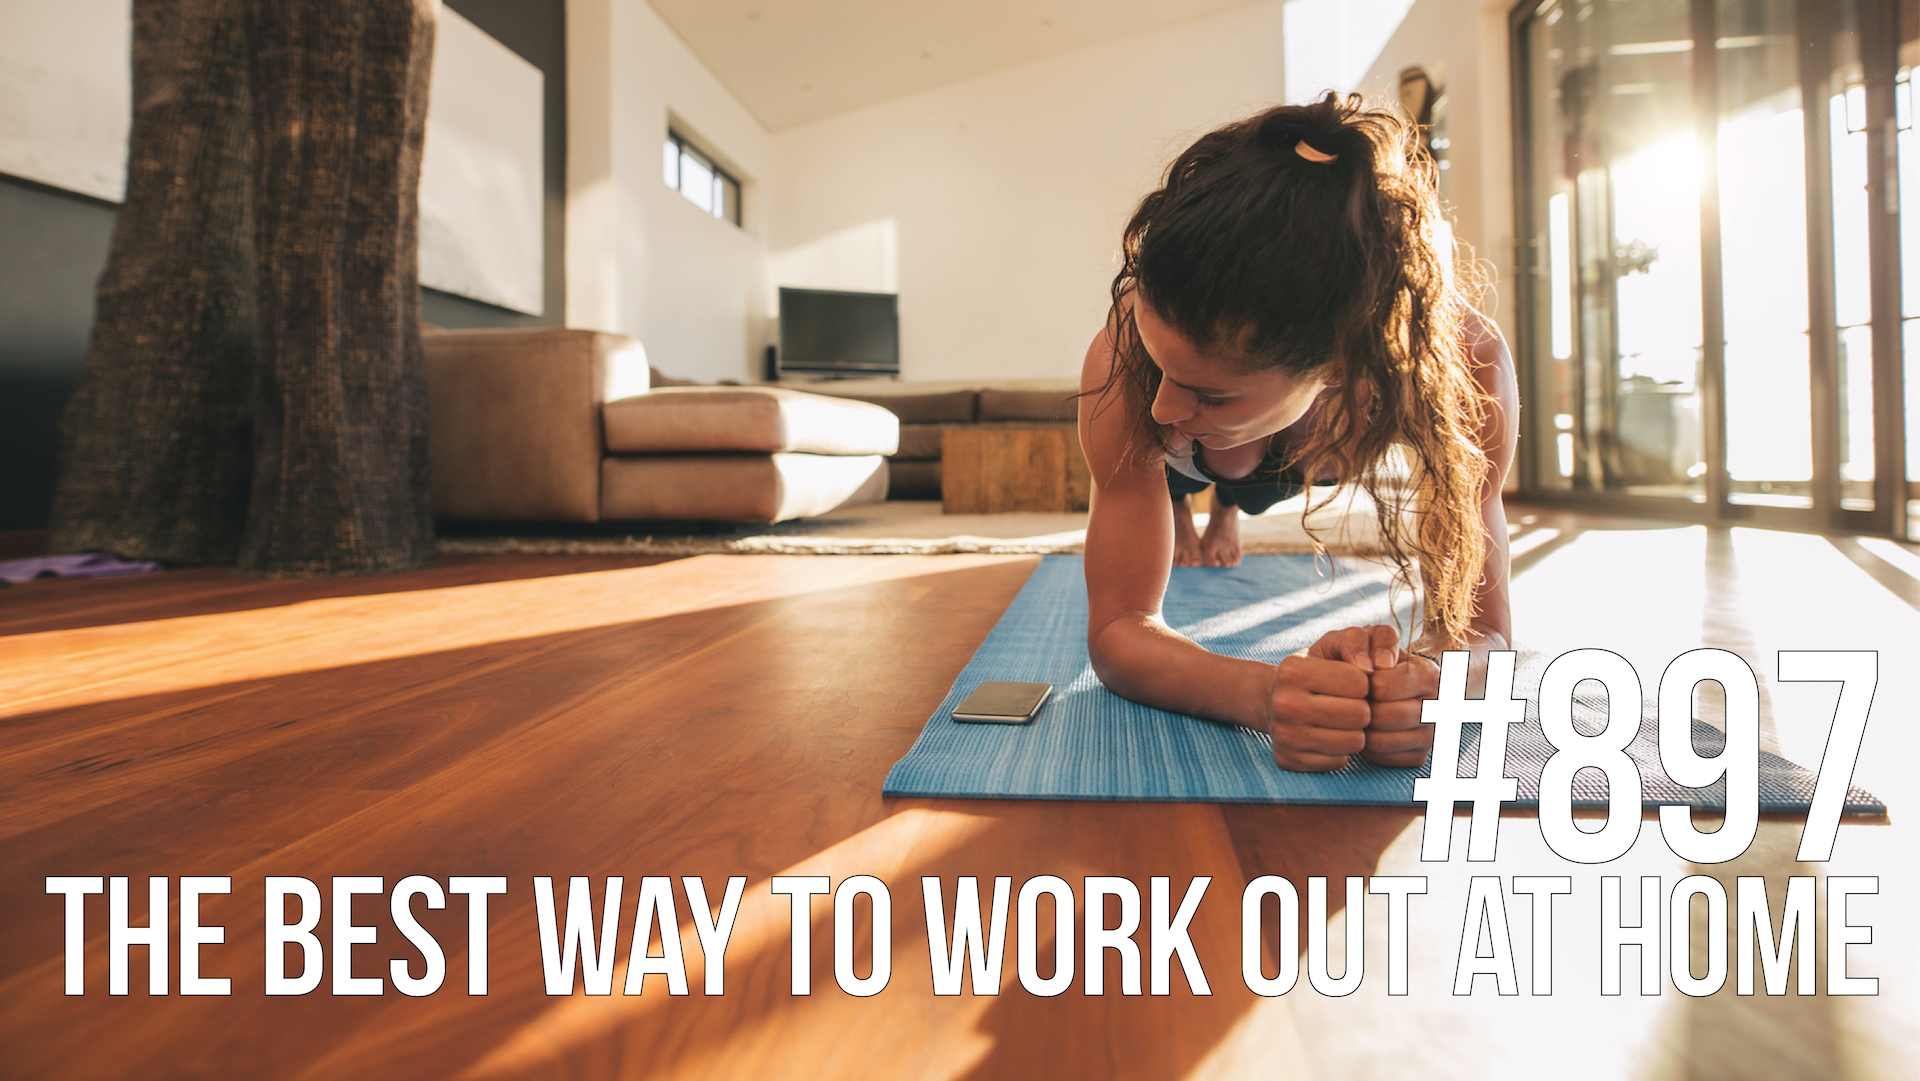 897: The Best Way to Work Out at Home and on the Road